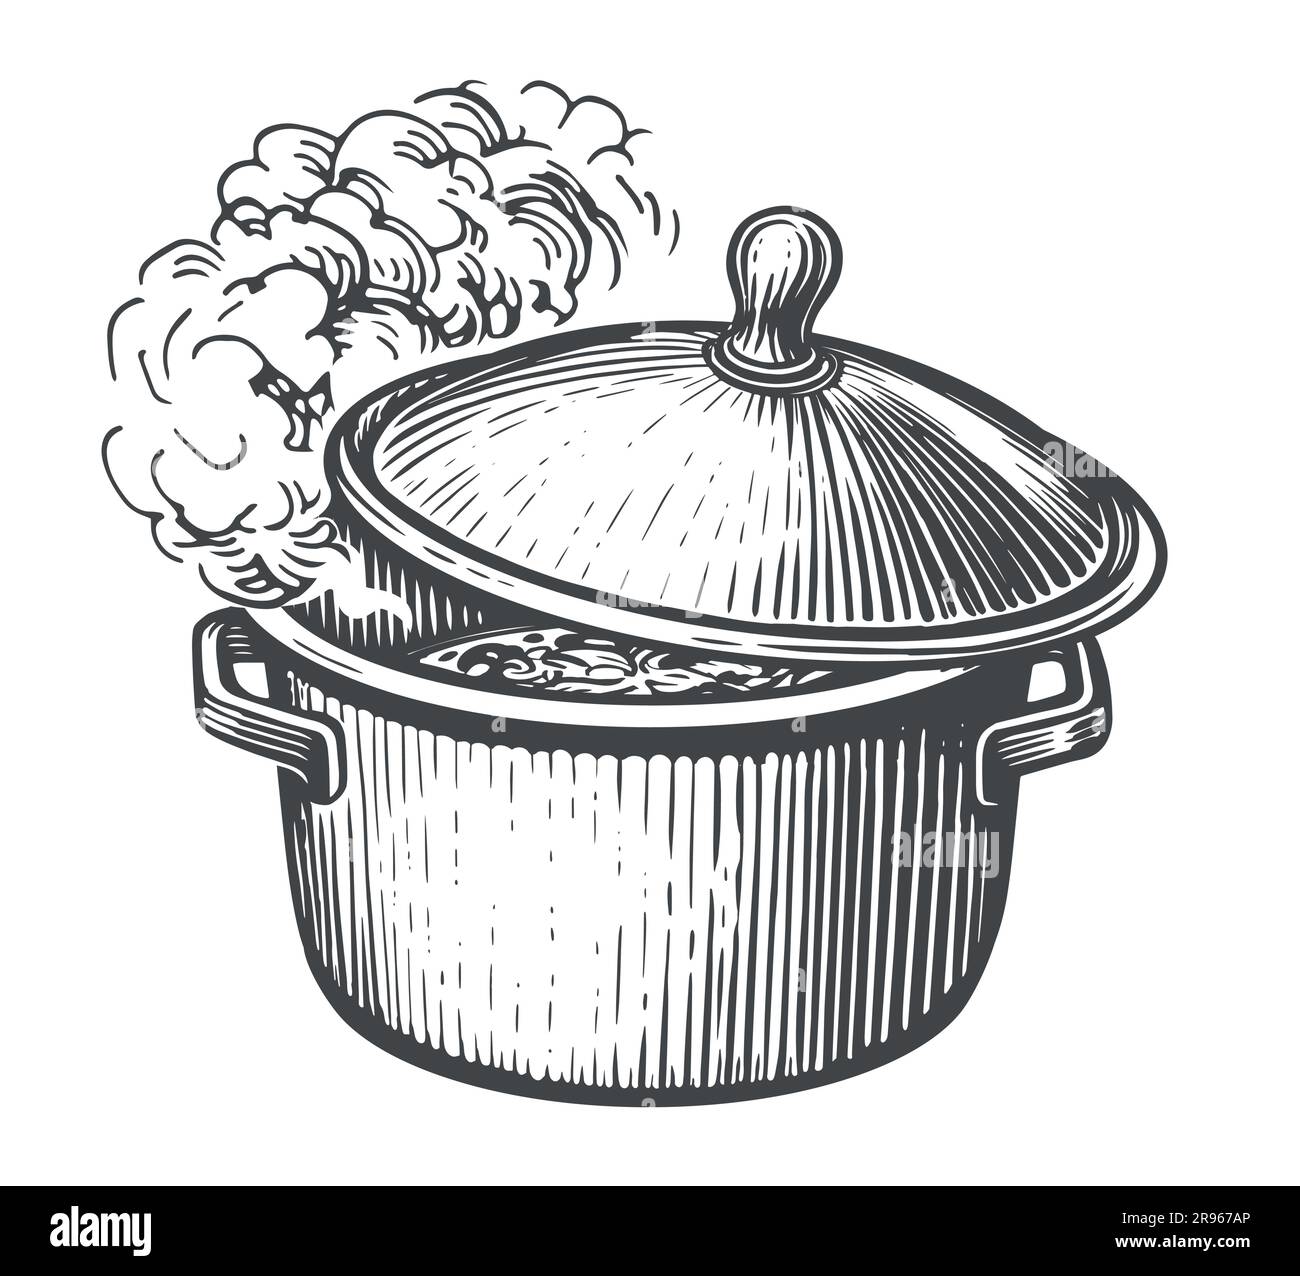 https://c8.alamy.com/comp/2R967AP/pot-with-boiling-soup-or-sauce-saucepan-with-open-lid-cooking-pan-and-steam-vector-sketch-illustration-2R967AP.jpg